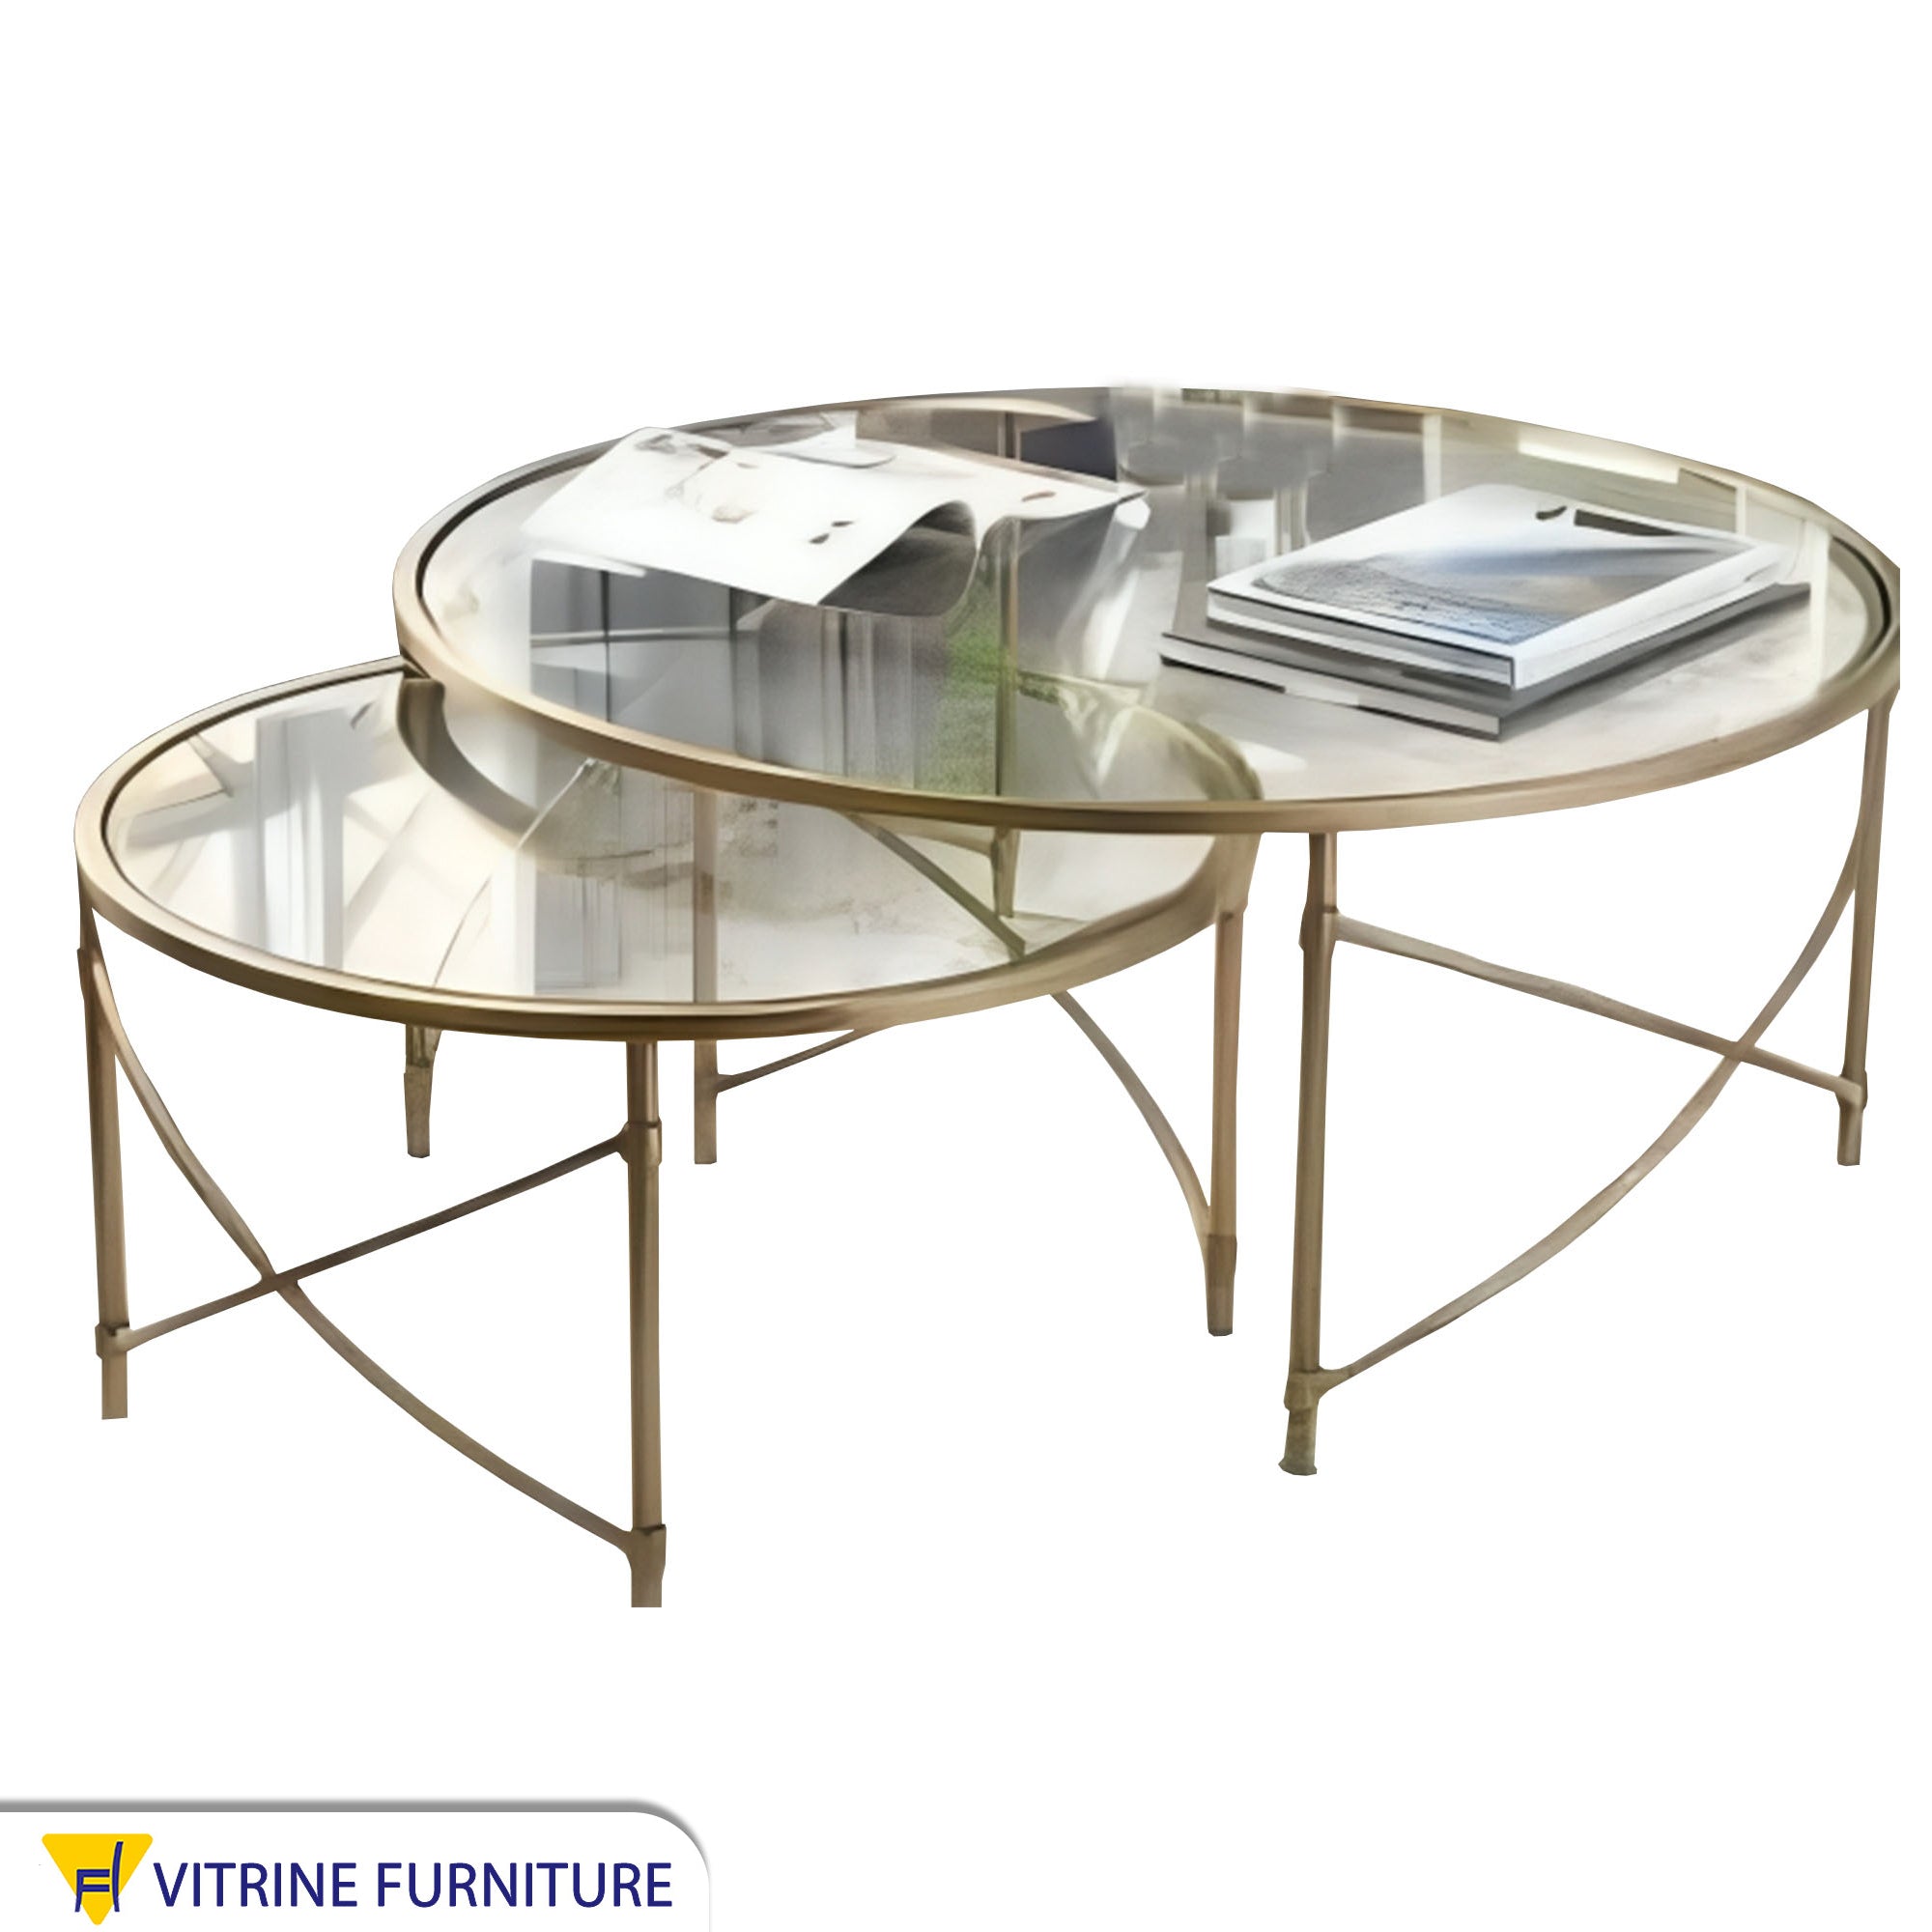 Two golden circular tables of different sizes